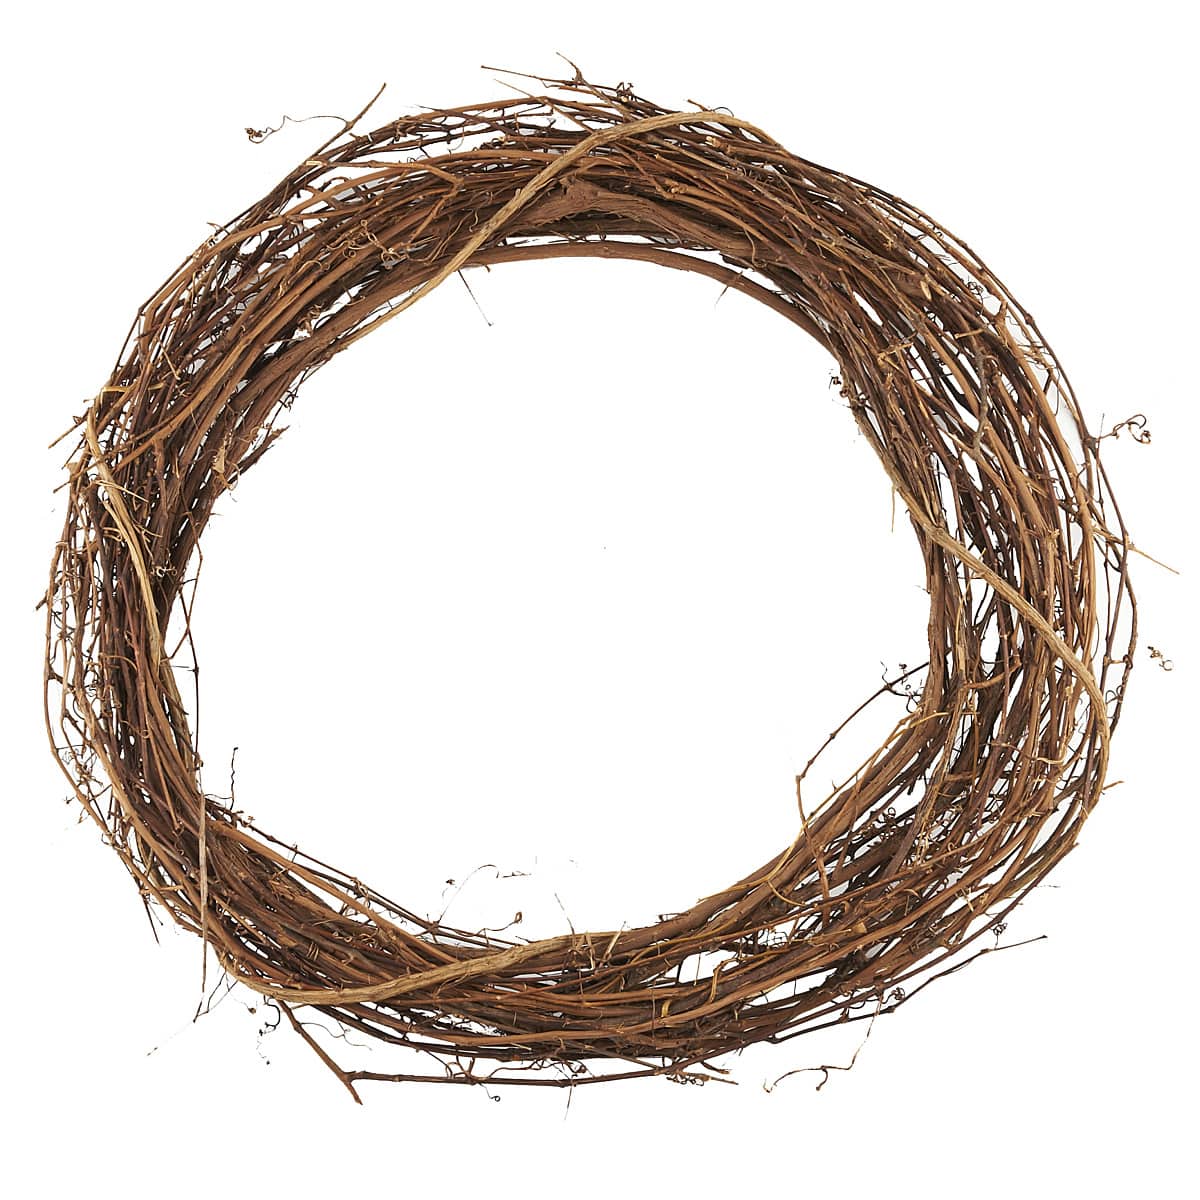 purchase-the-36-grapevine-wreath-by-ashland-at-michaels